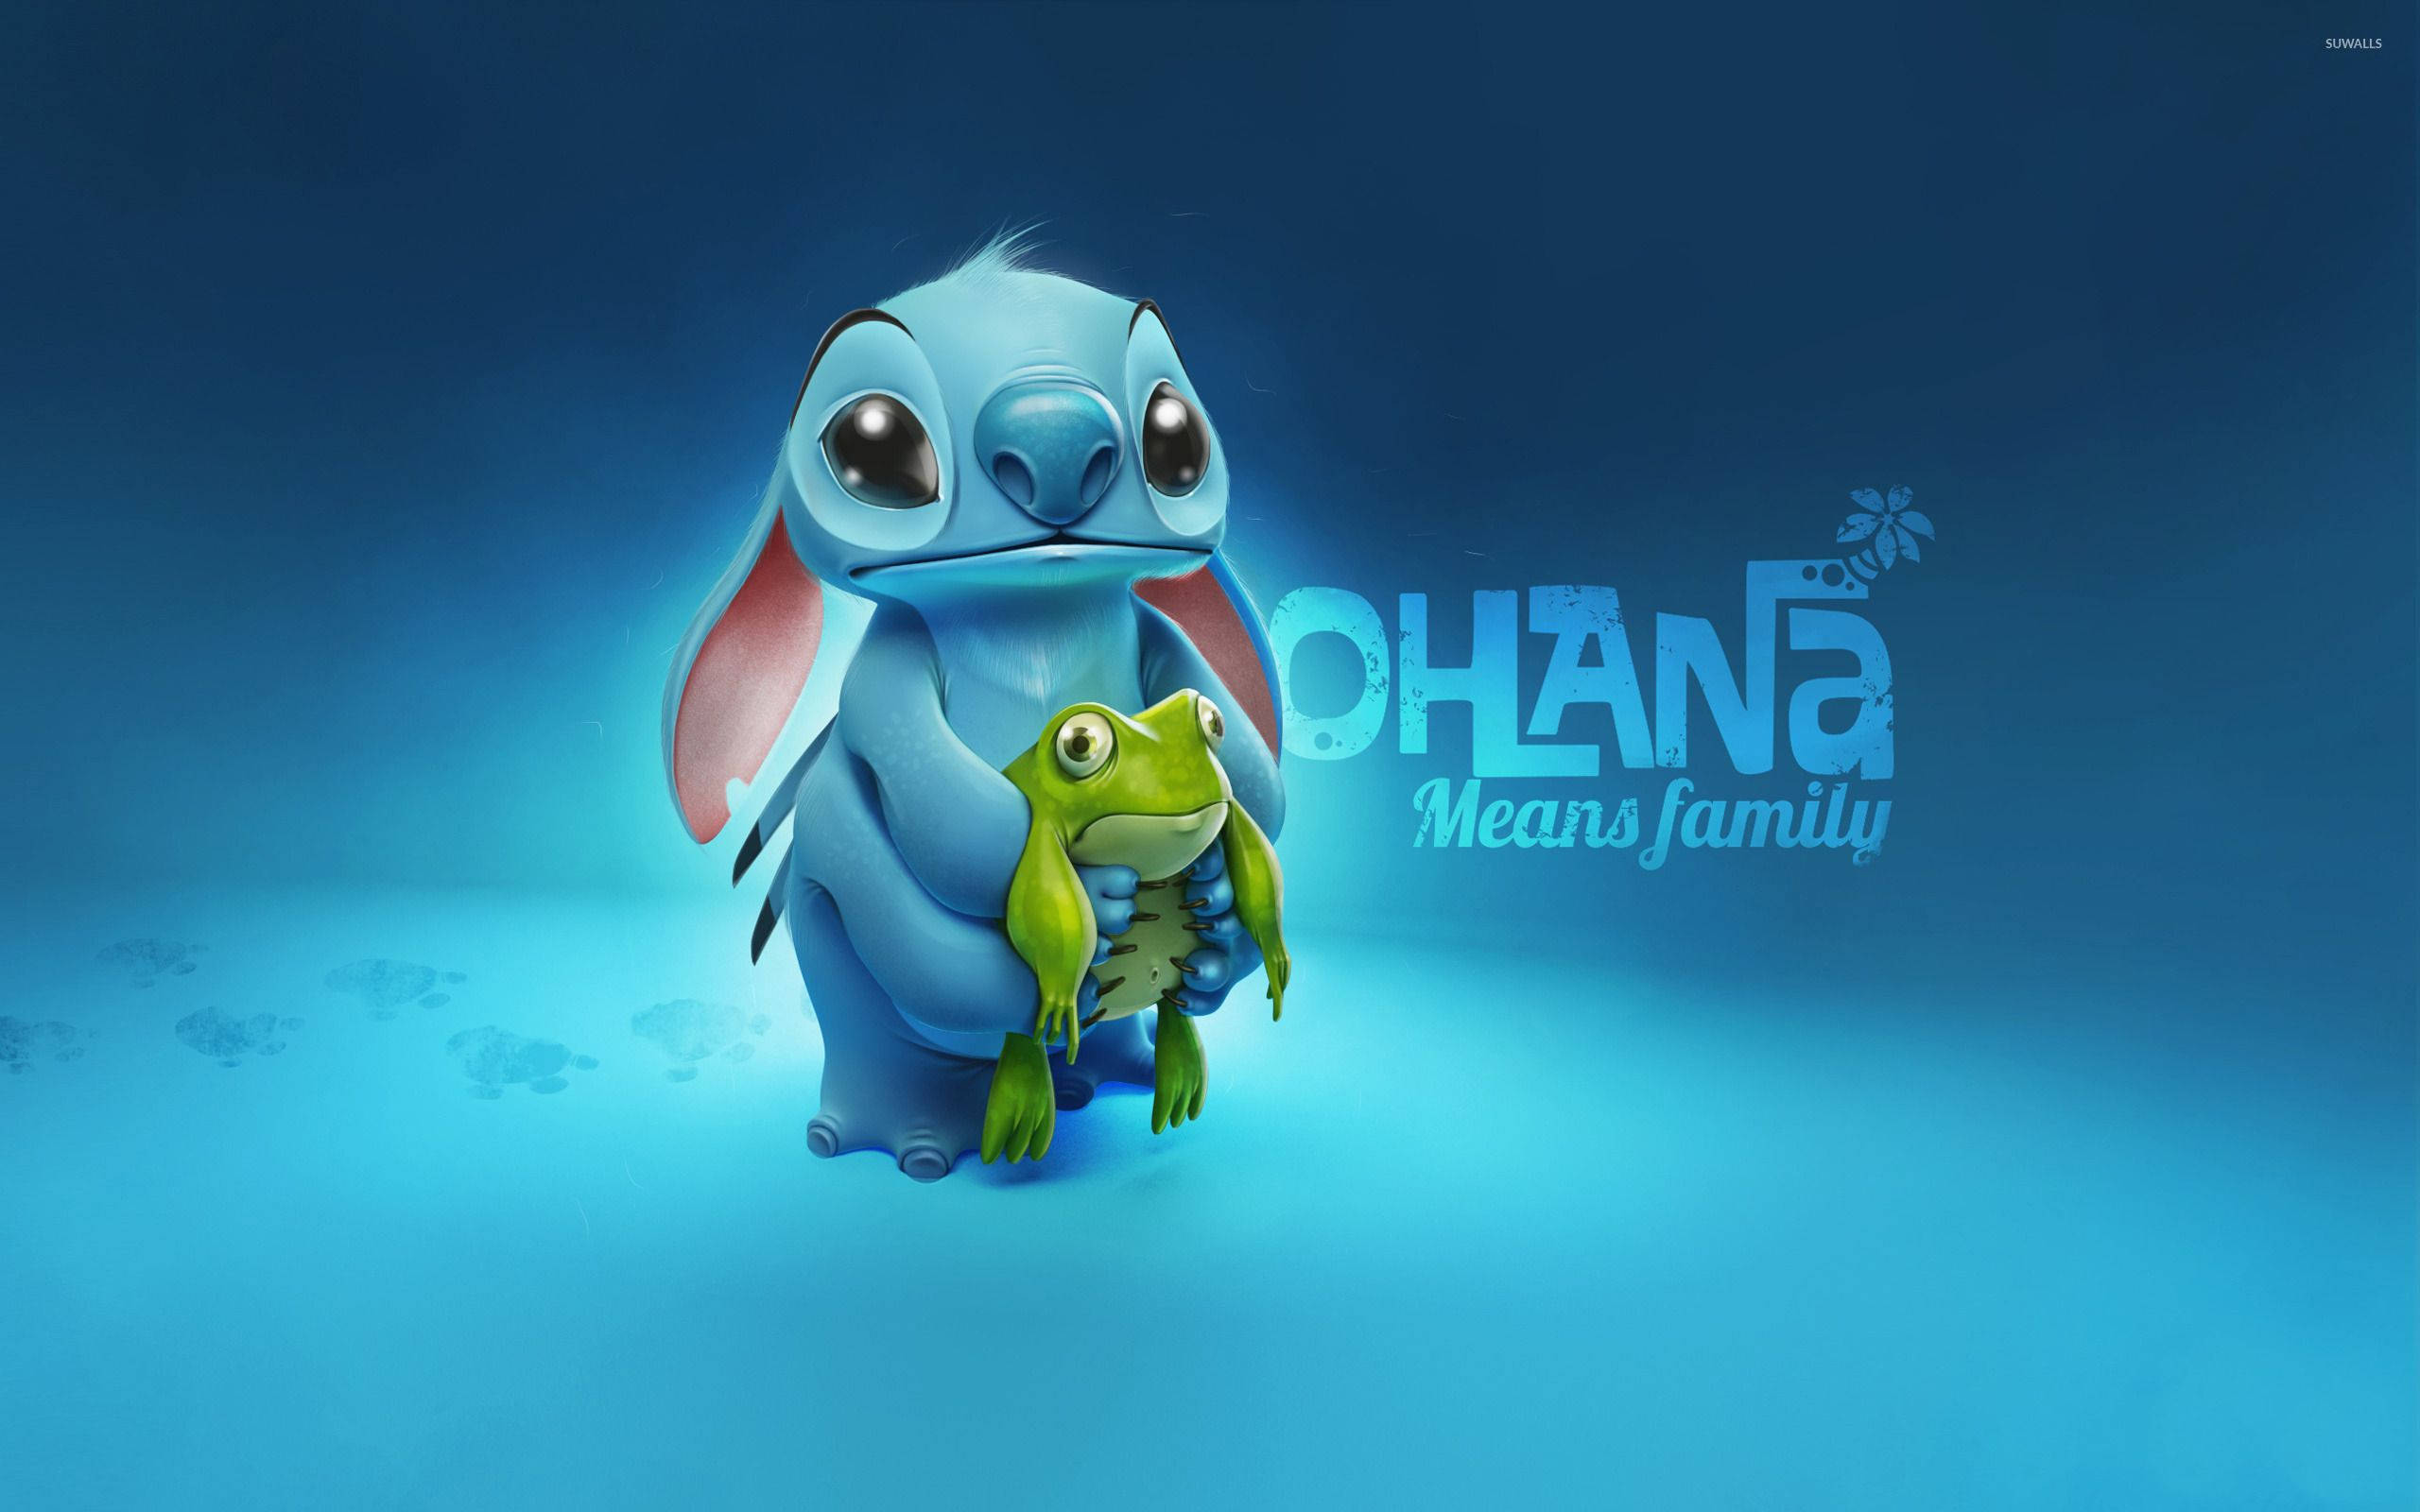 Download Stitch Ohana Means Family Wallpaper 